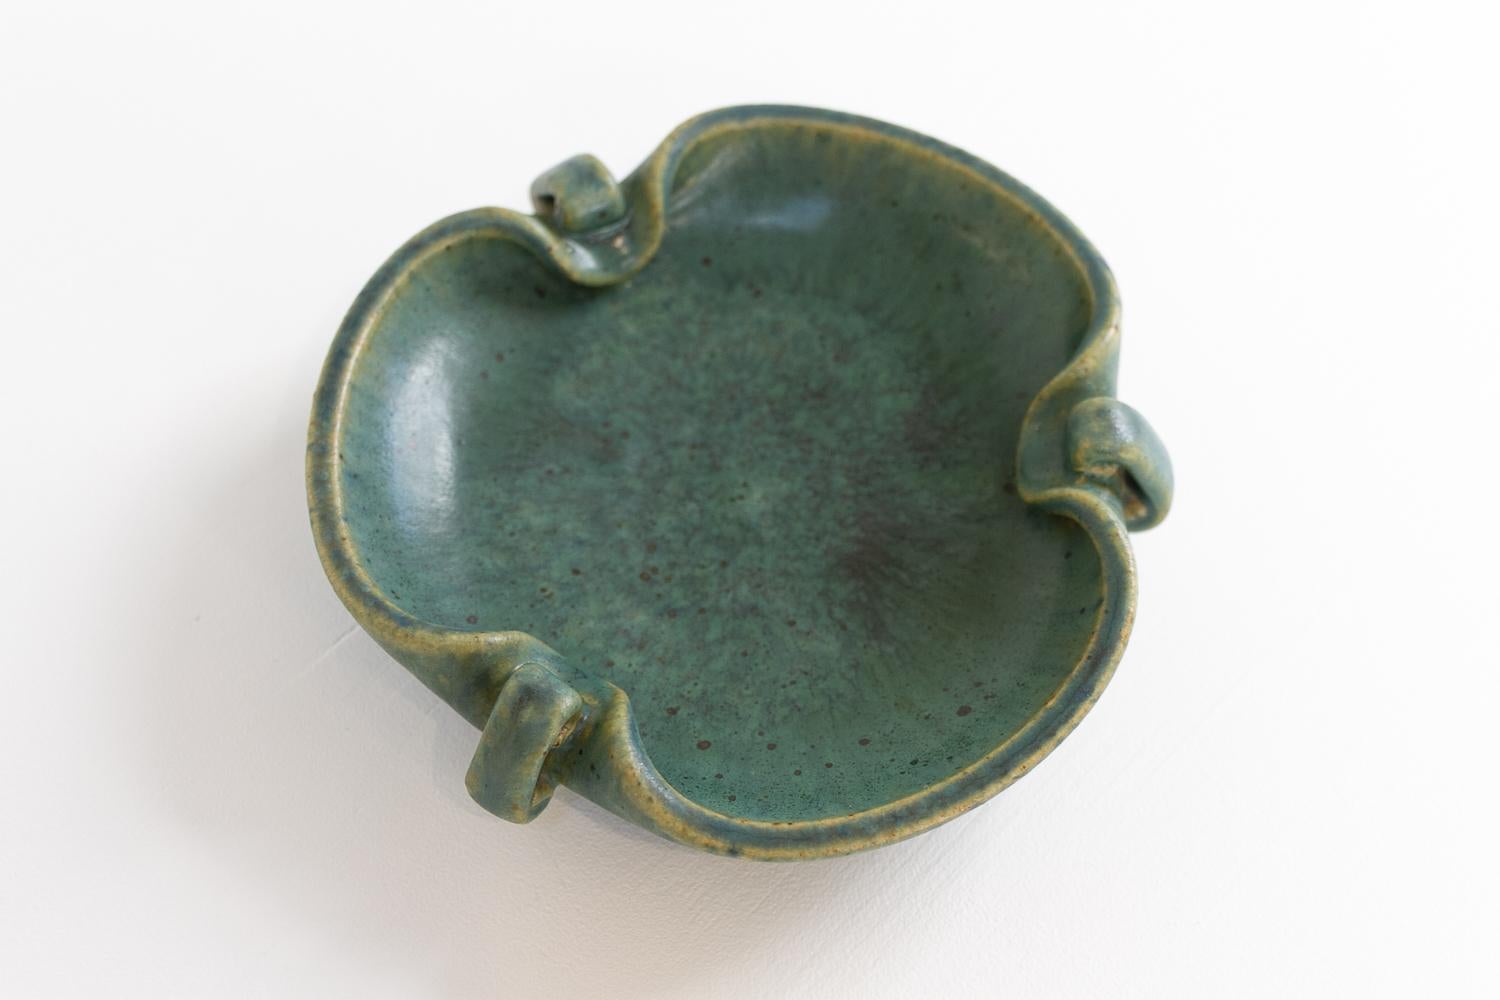 Ceramic bowl by Arne Bang, 1940s.
Danish organically shaped glazed ceramic bowl or ashtray by Arne Bang, Denmark made in the 1940s. Beautiful speckled glaze in green and earth shades. 

Diameter: 17 cm, height 3.5 cm.
Signed underneath with monogram